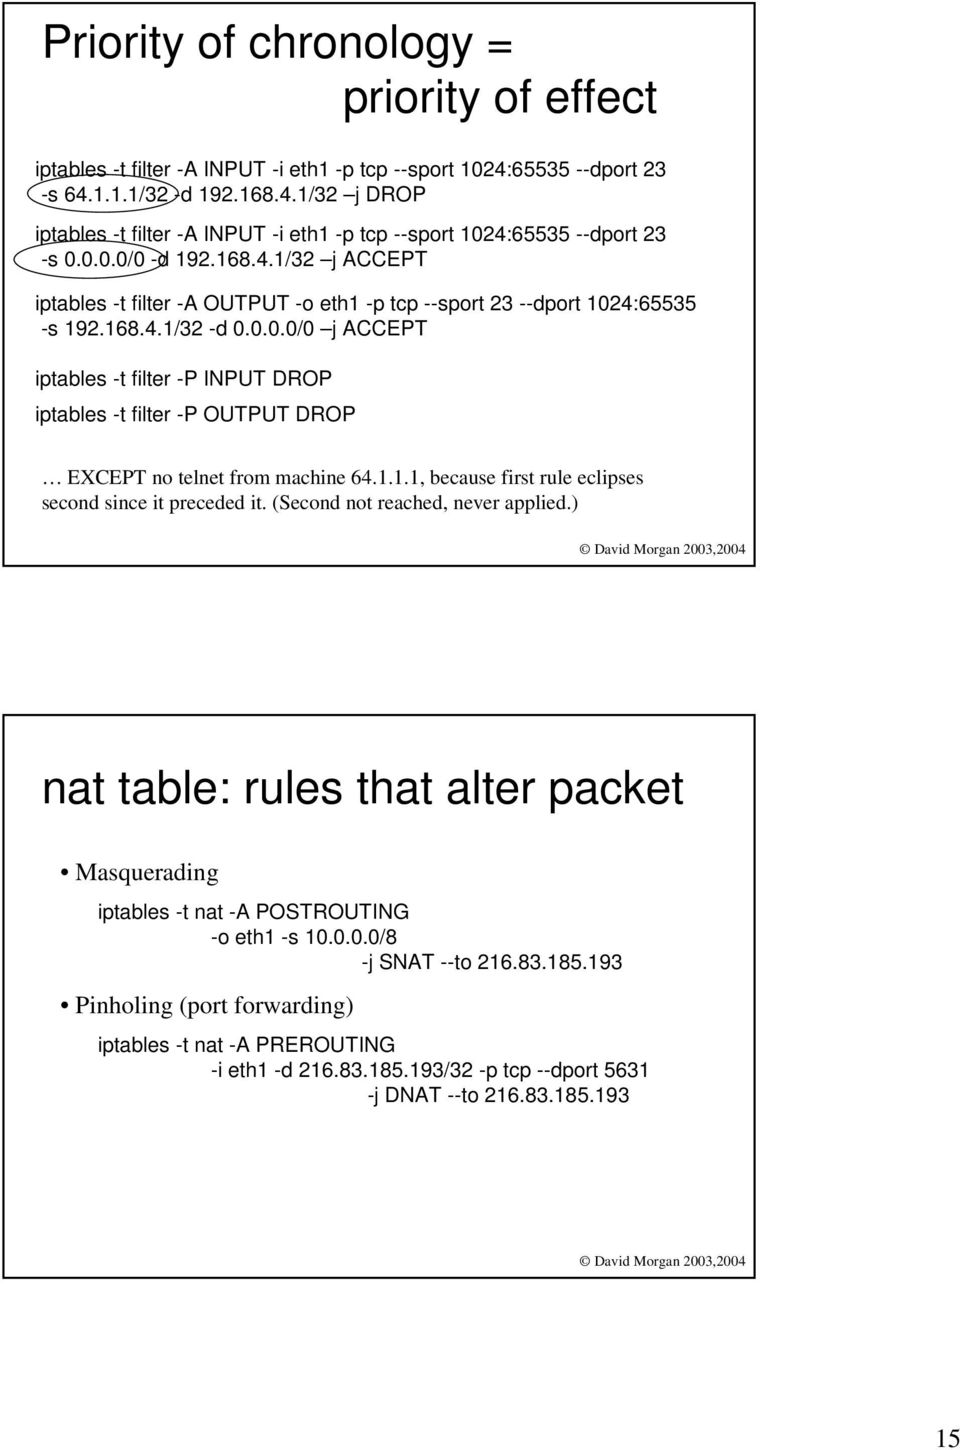 DROP iptables -t filter -P OUTPUT DROP EXCEPT no telnet from machine 64111, because first rule eclipses second since it preceded it (Second not reached, never applied) nat table: rules that alter